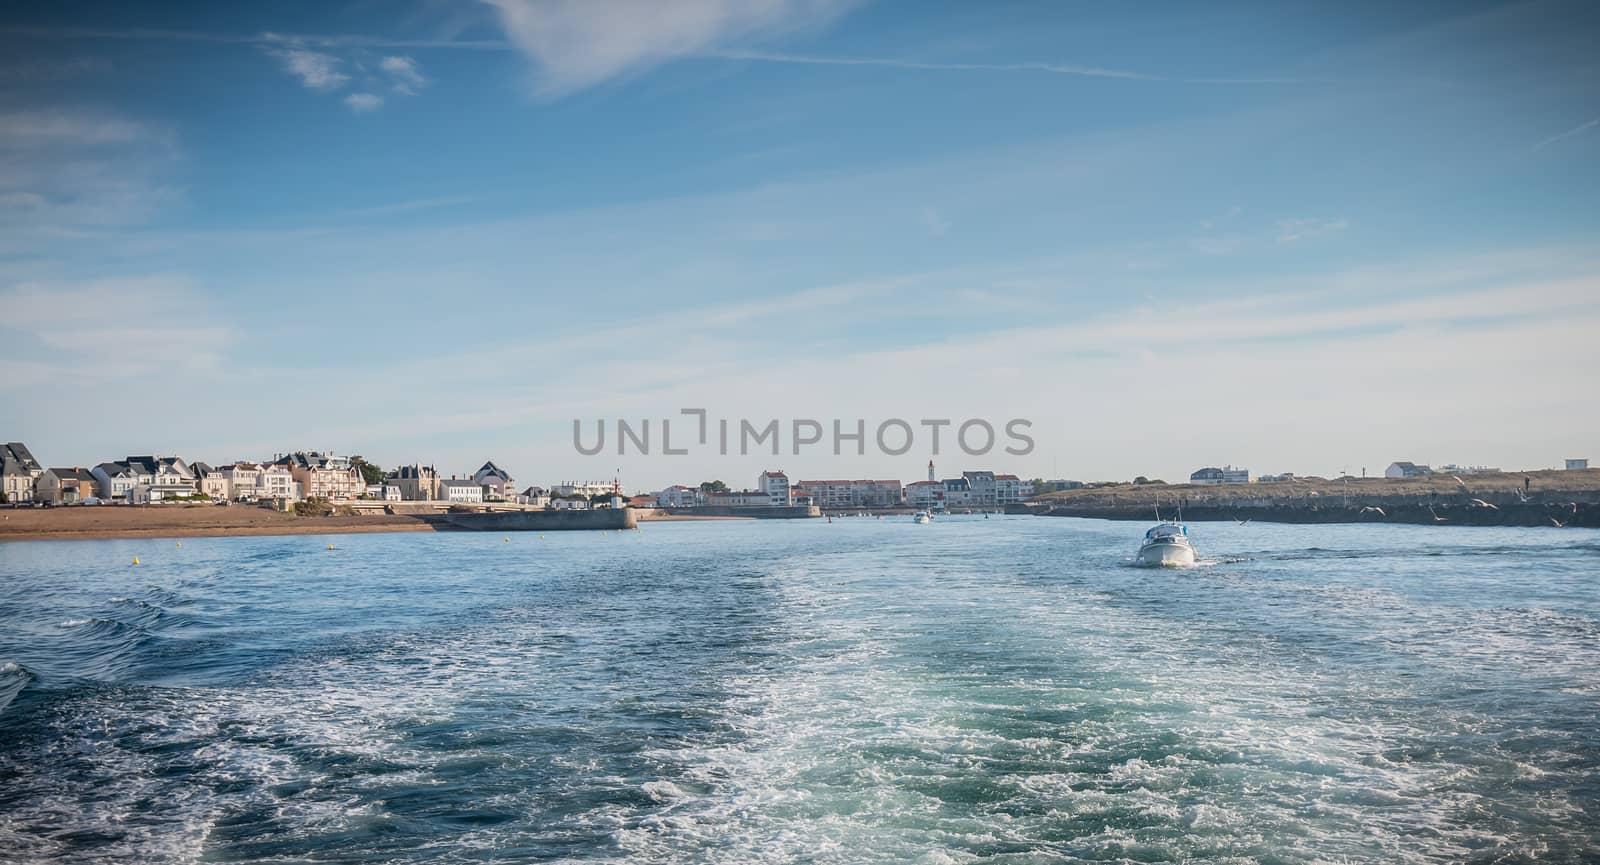 Saint Gilles Croix de Vie, France - September 16, 2018: A small fishing boat sailing at the port exit on a summer day